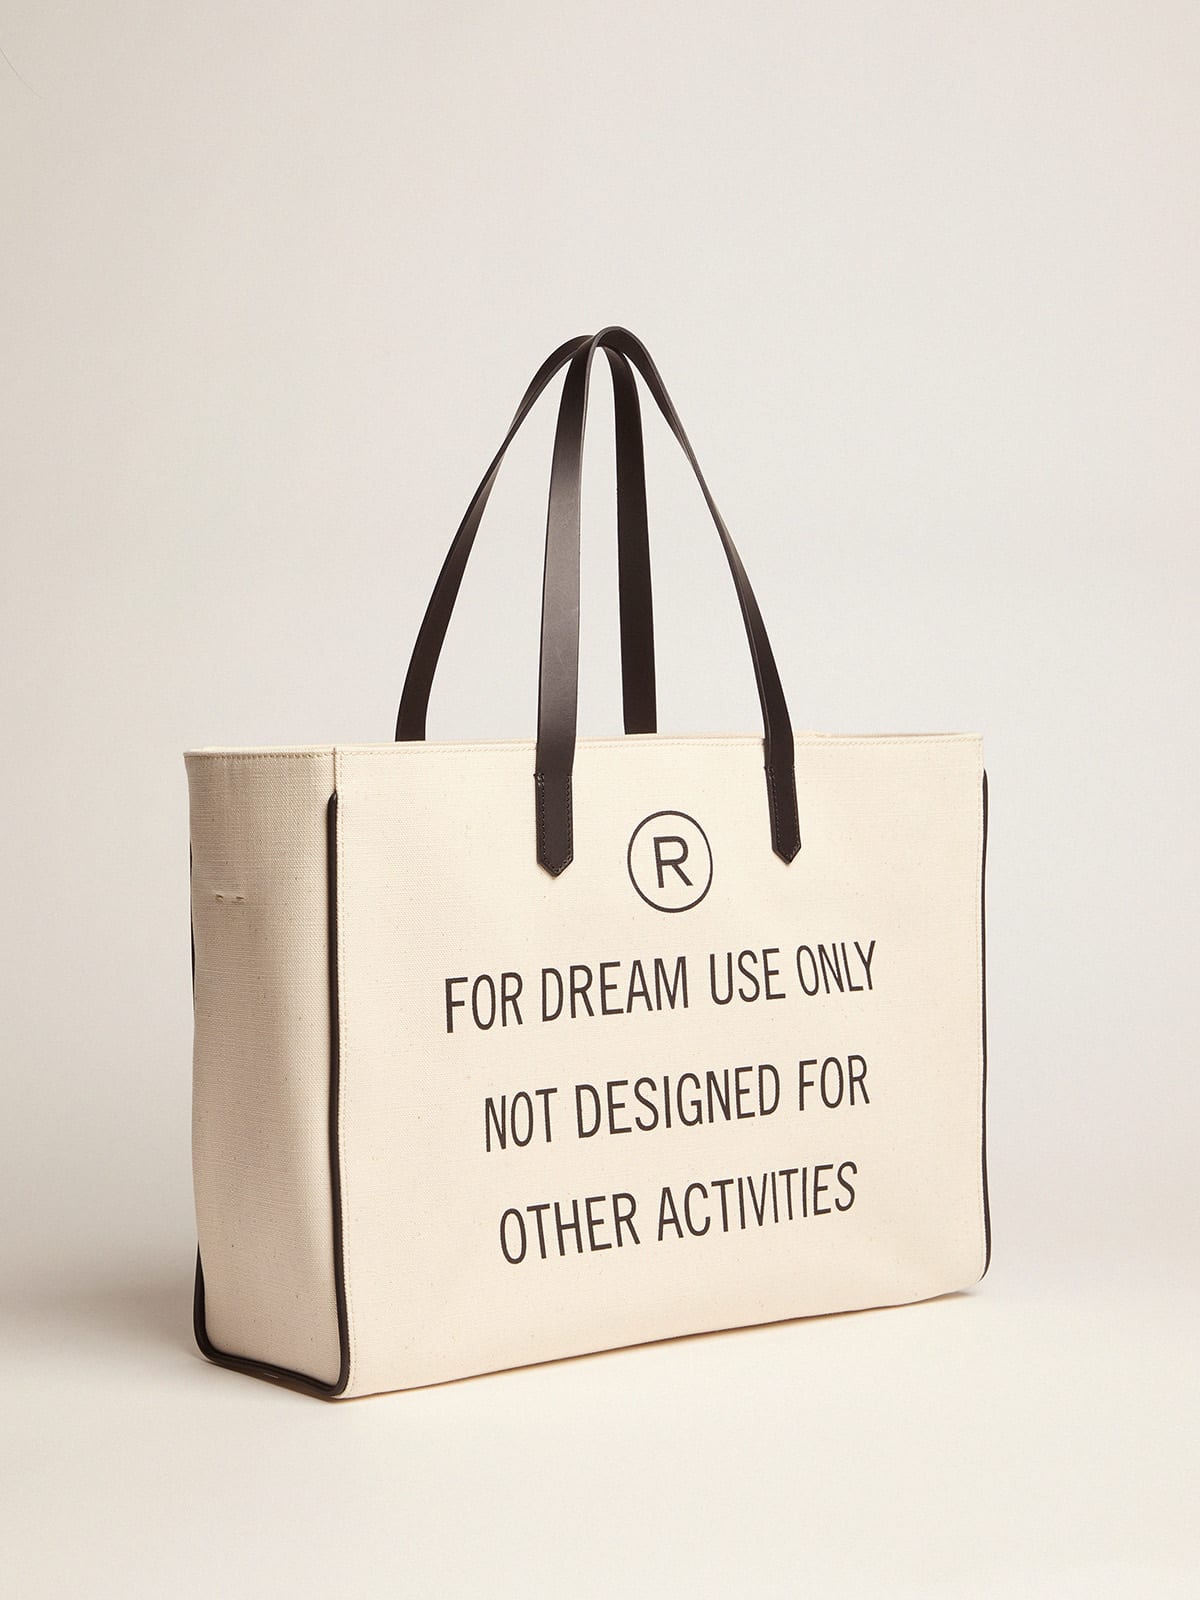 Golden Goose - "For dream use only" East-West California Bag in 